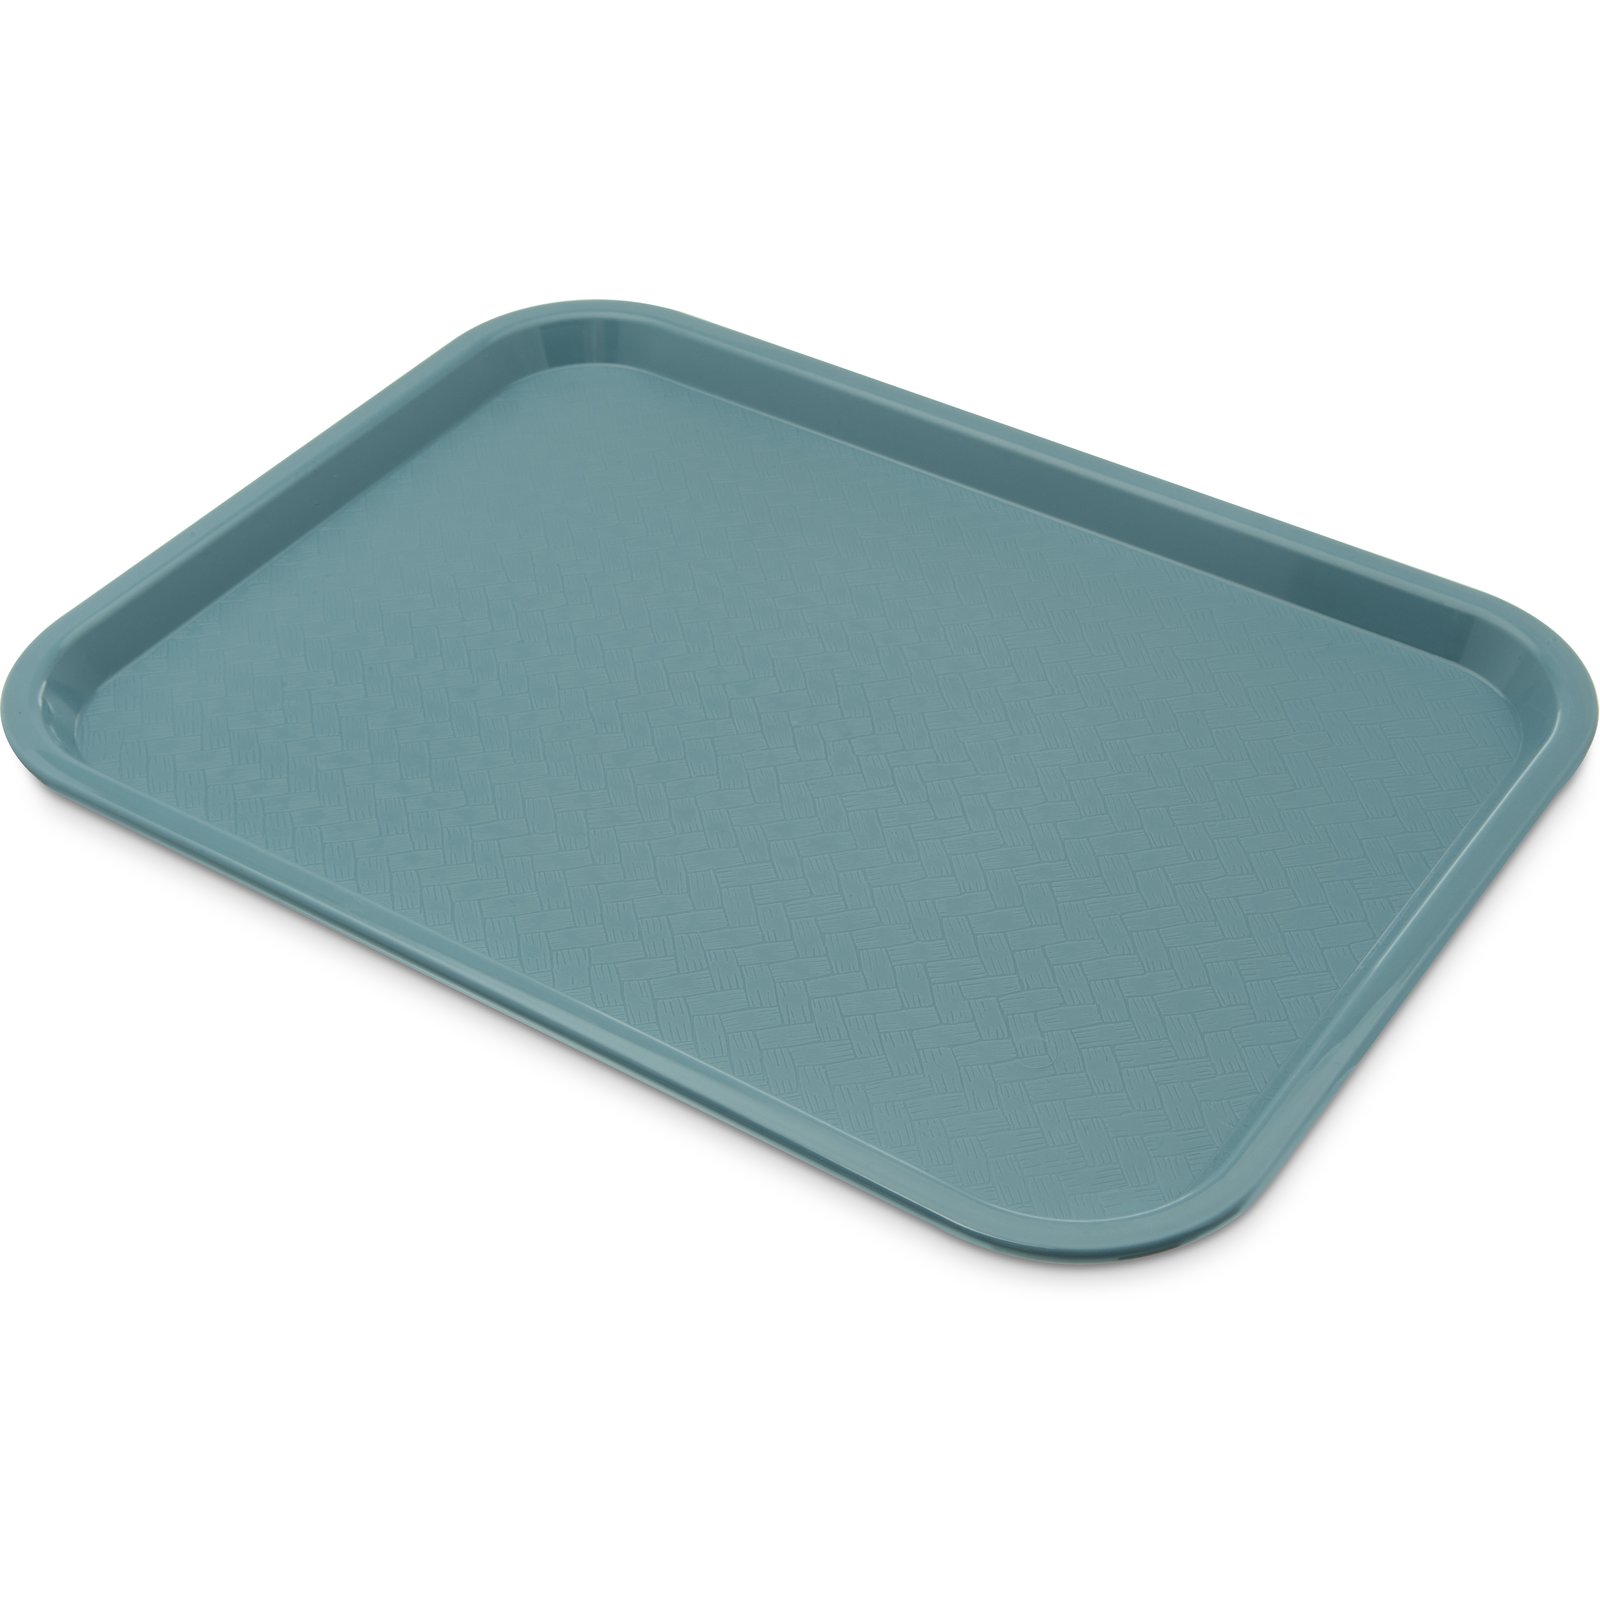 CT121659 - Cafe® Fast Food Cafeteria Tray 12 x 16 - Slate Blue